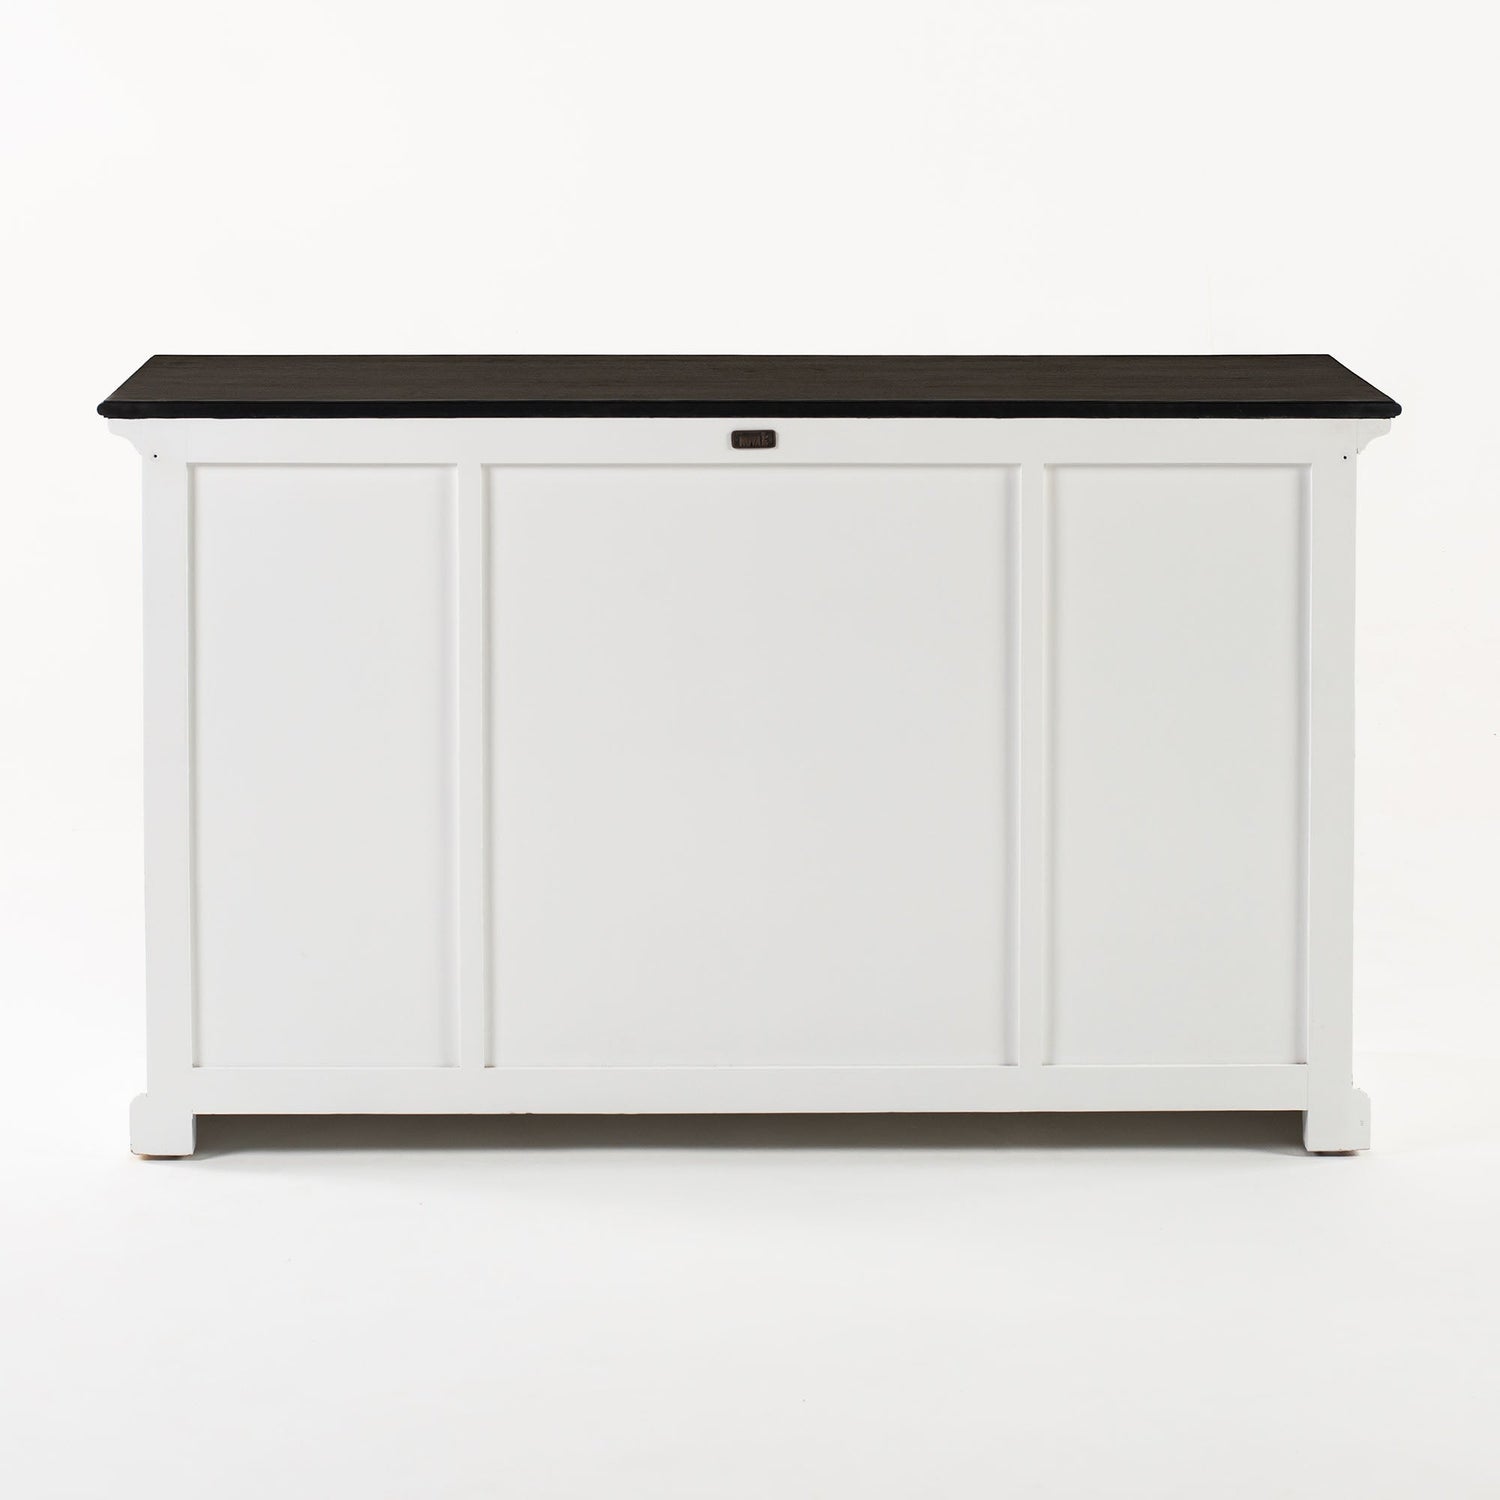 Halifax Contrast sideboard with 4 doors and 3 drawers